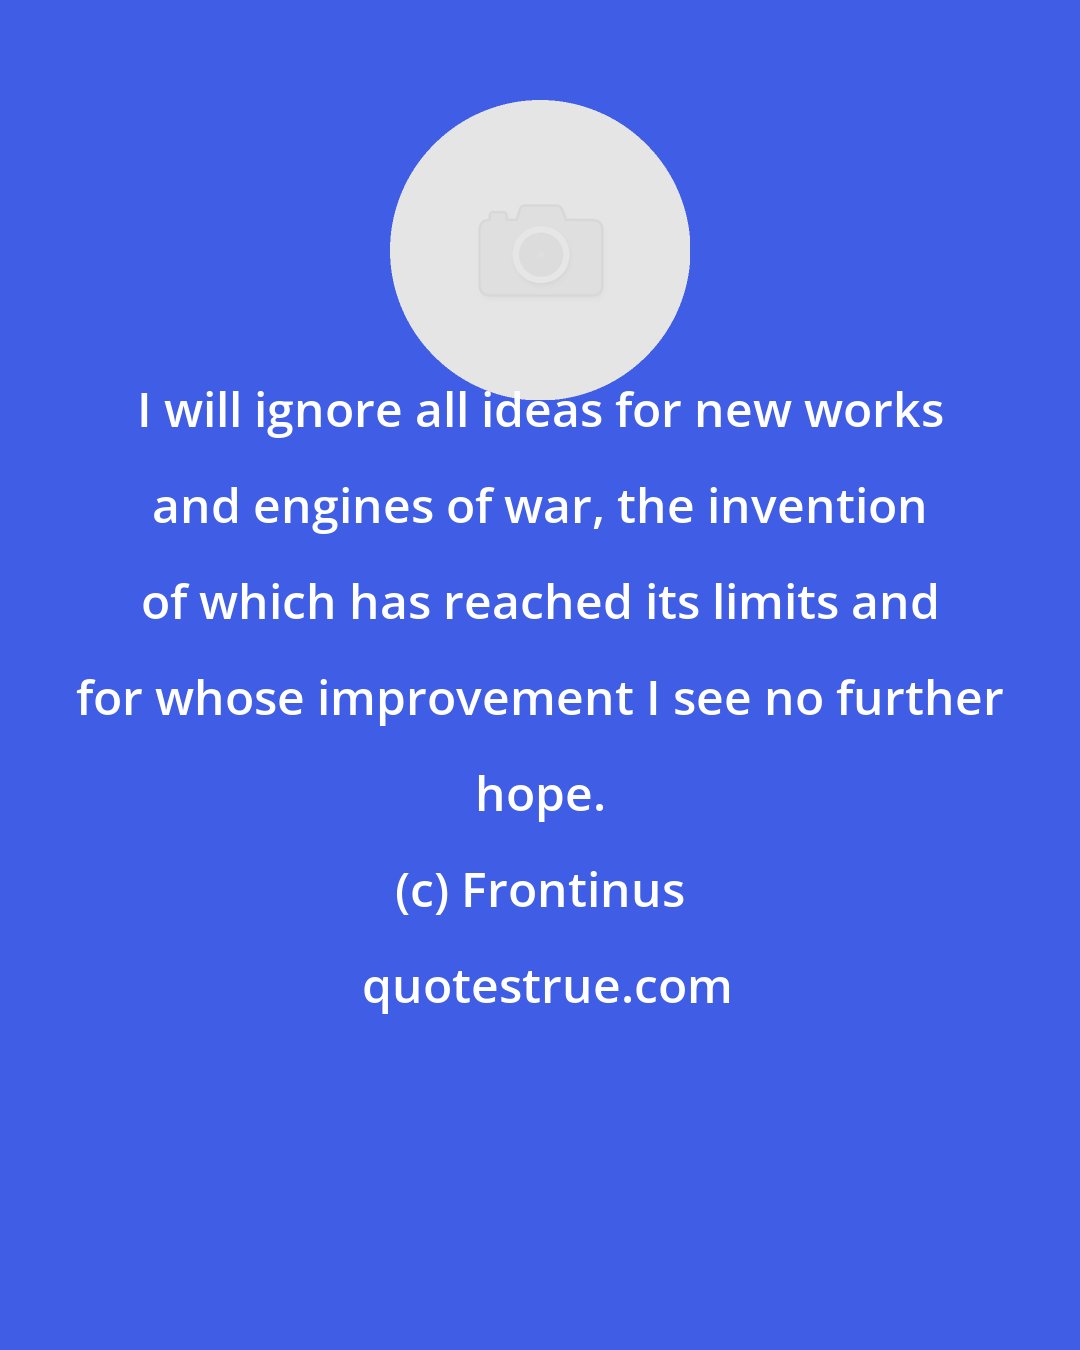 Frontinus: I will ignore all ideas for new works and engines of war, the invention of which has reached its limits and for whose improvement I see no further hope.